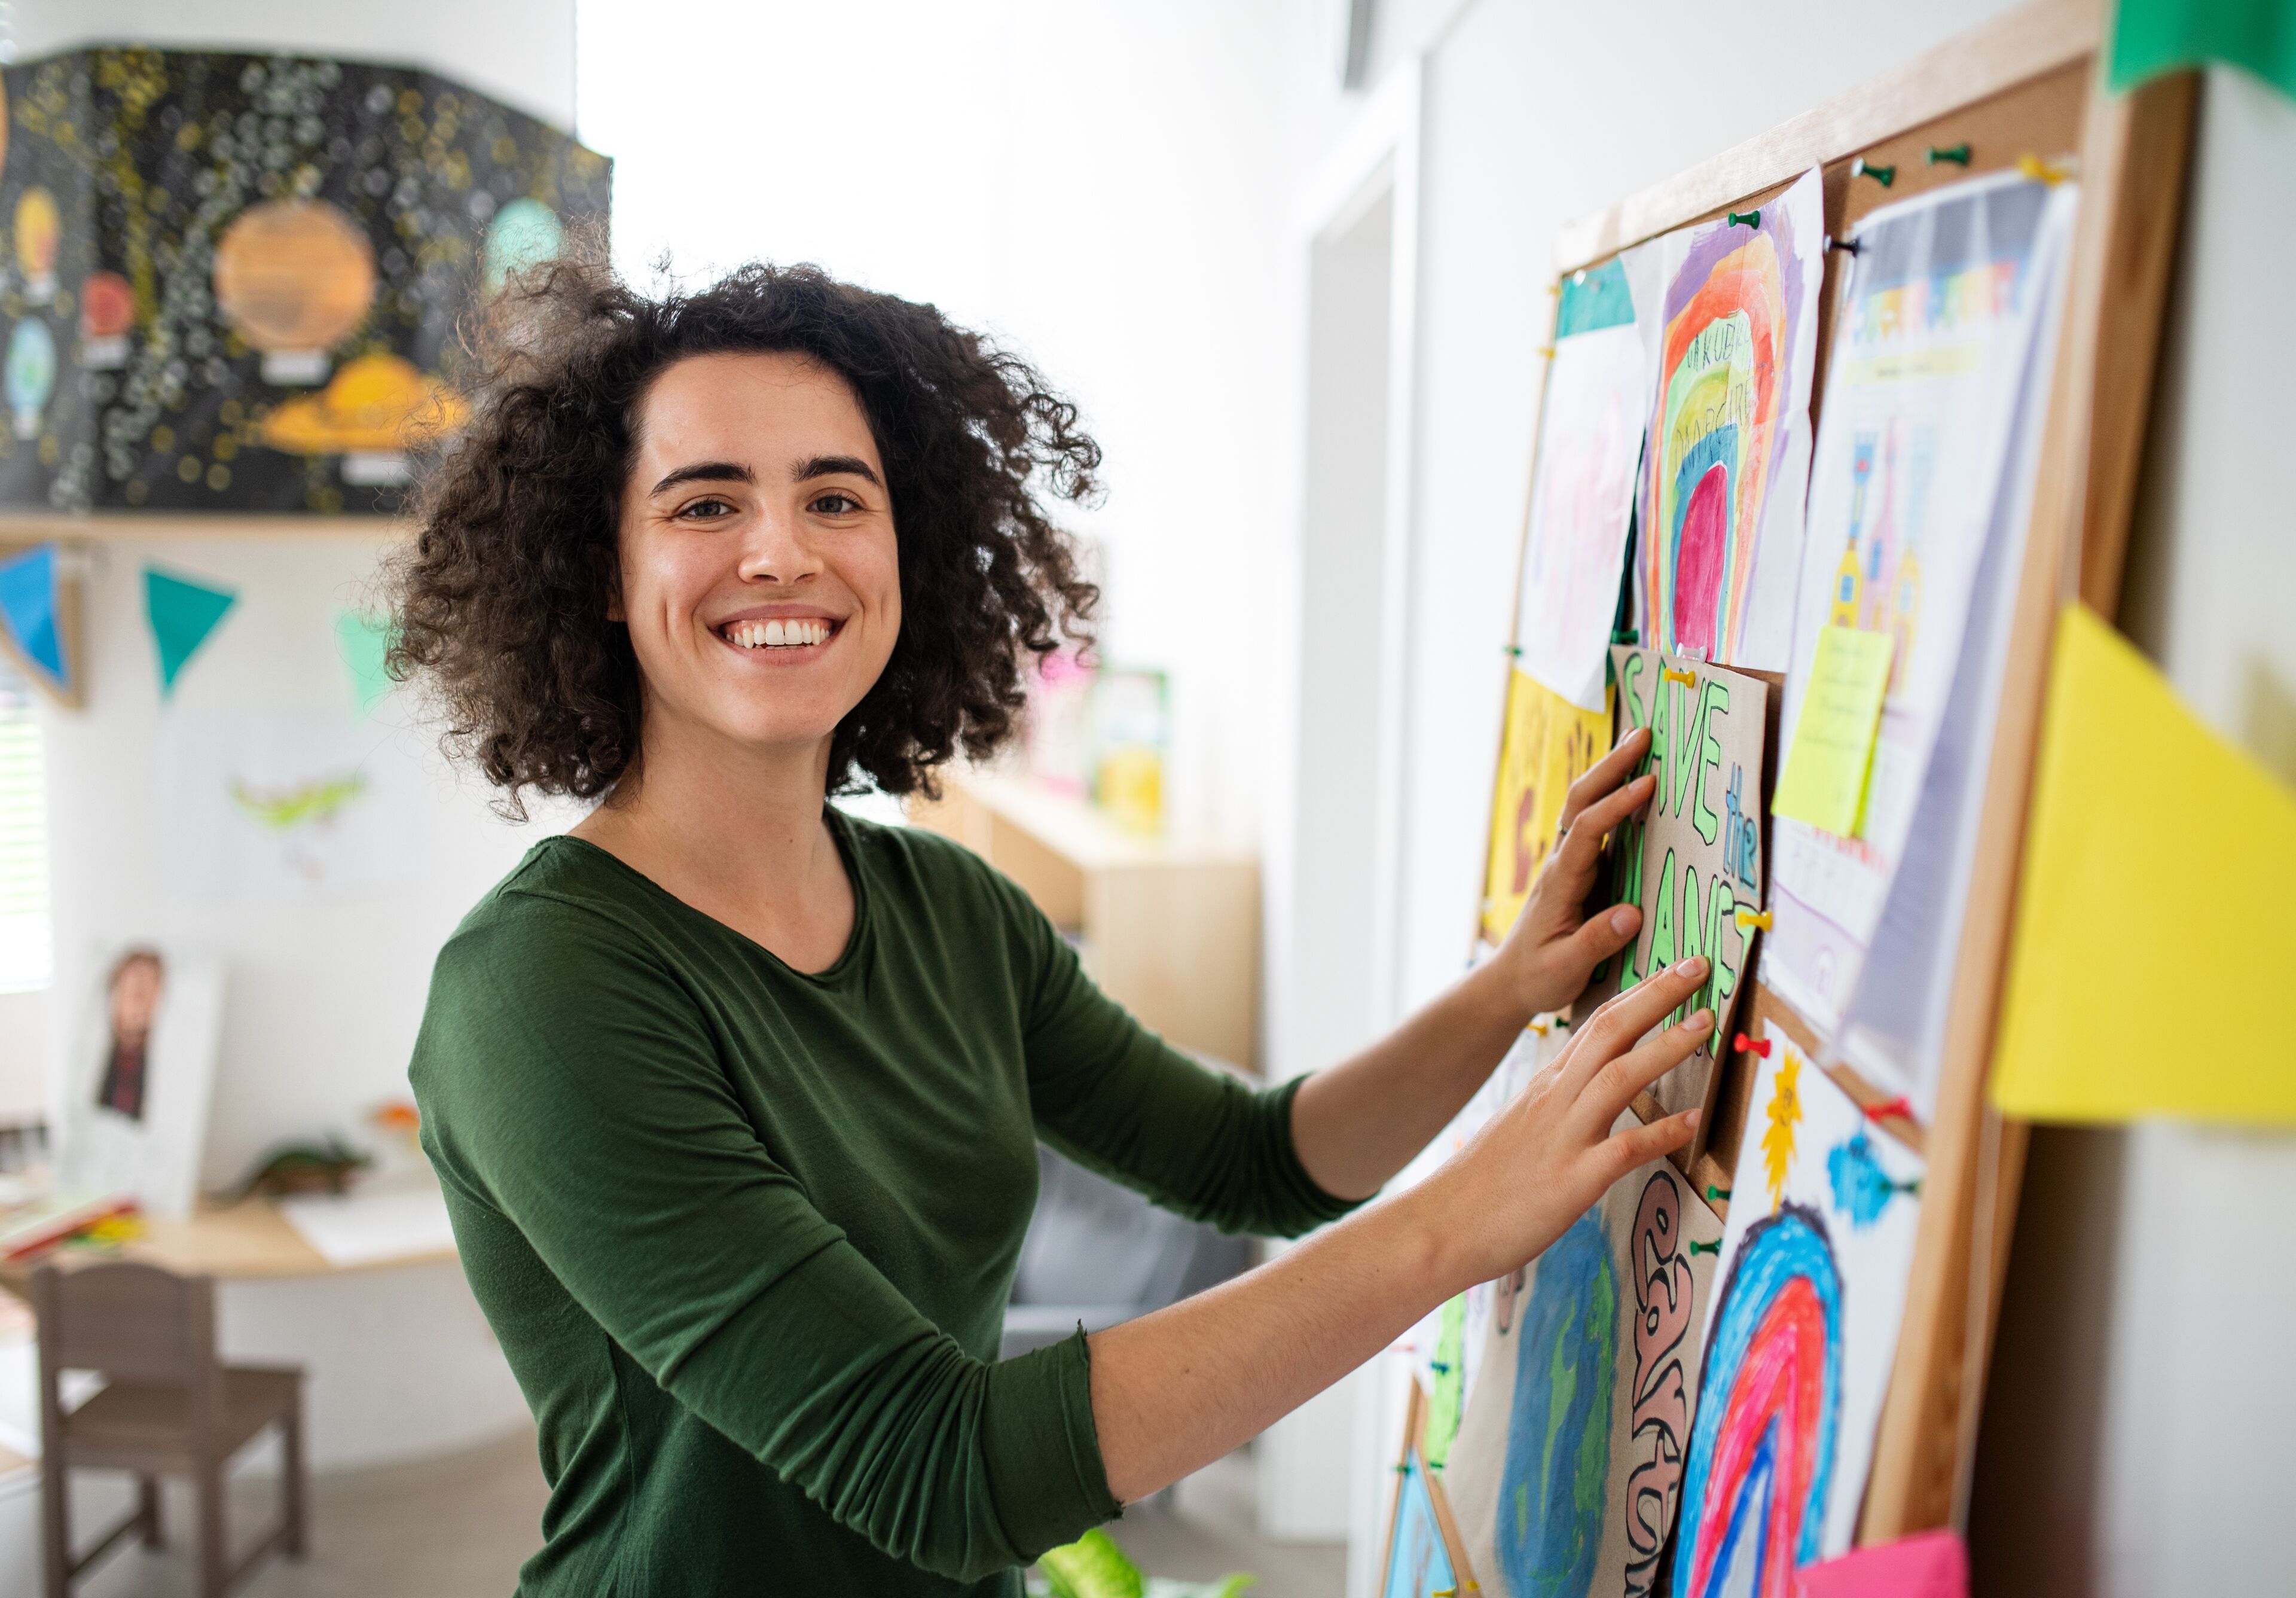 A cheerful art teacher arranges colorful student artwork on a display board in a bright classroom.